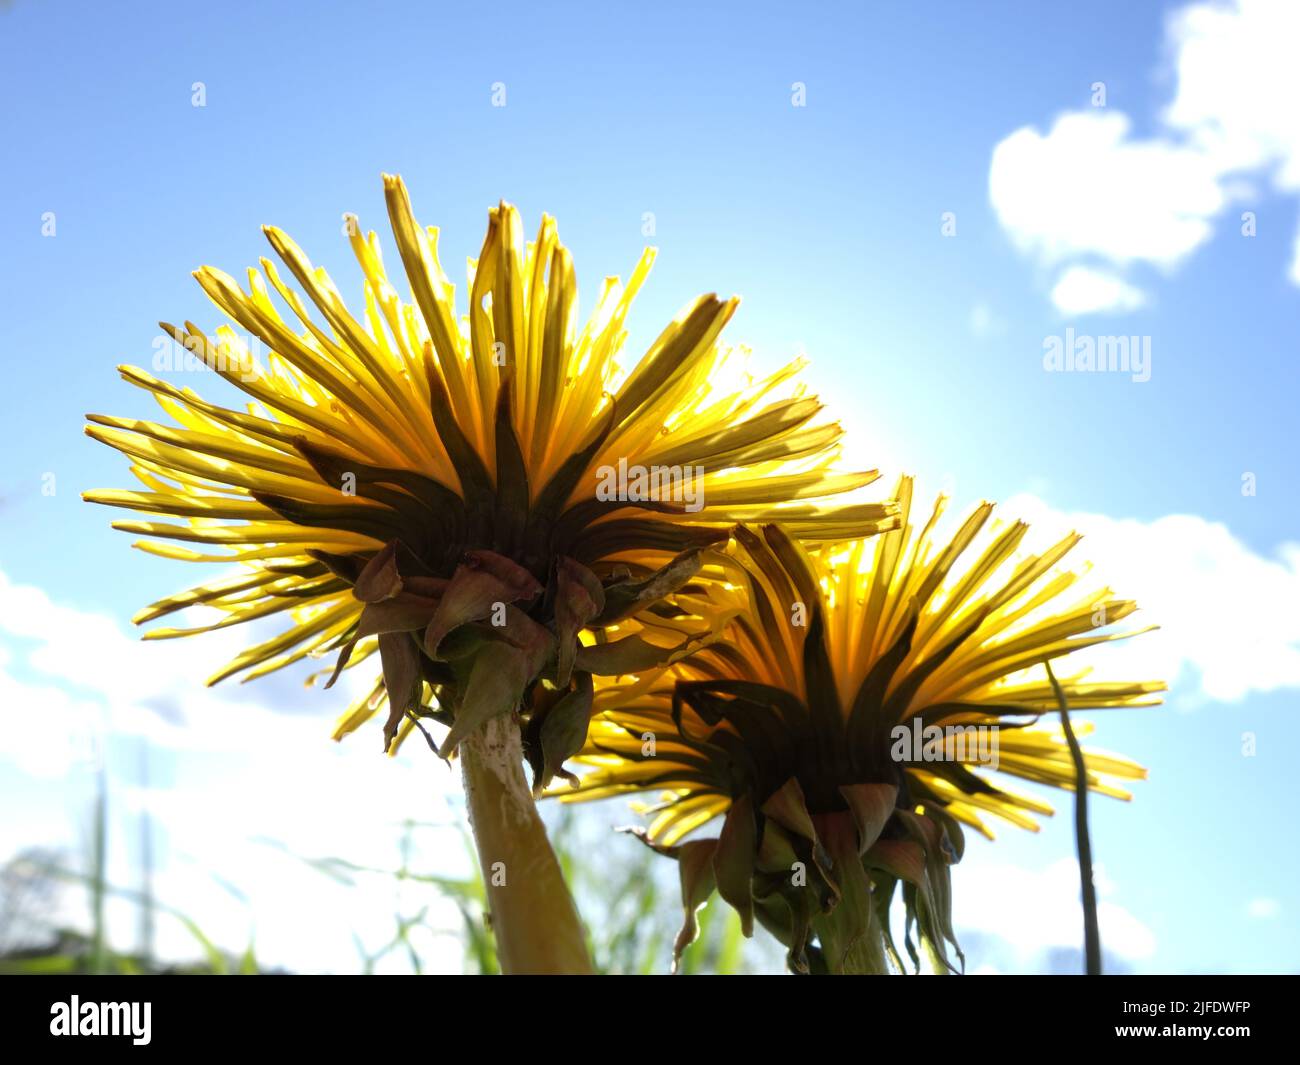 Dandelion seen from below, with the sun shining straight through the flower head. Stock Photo